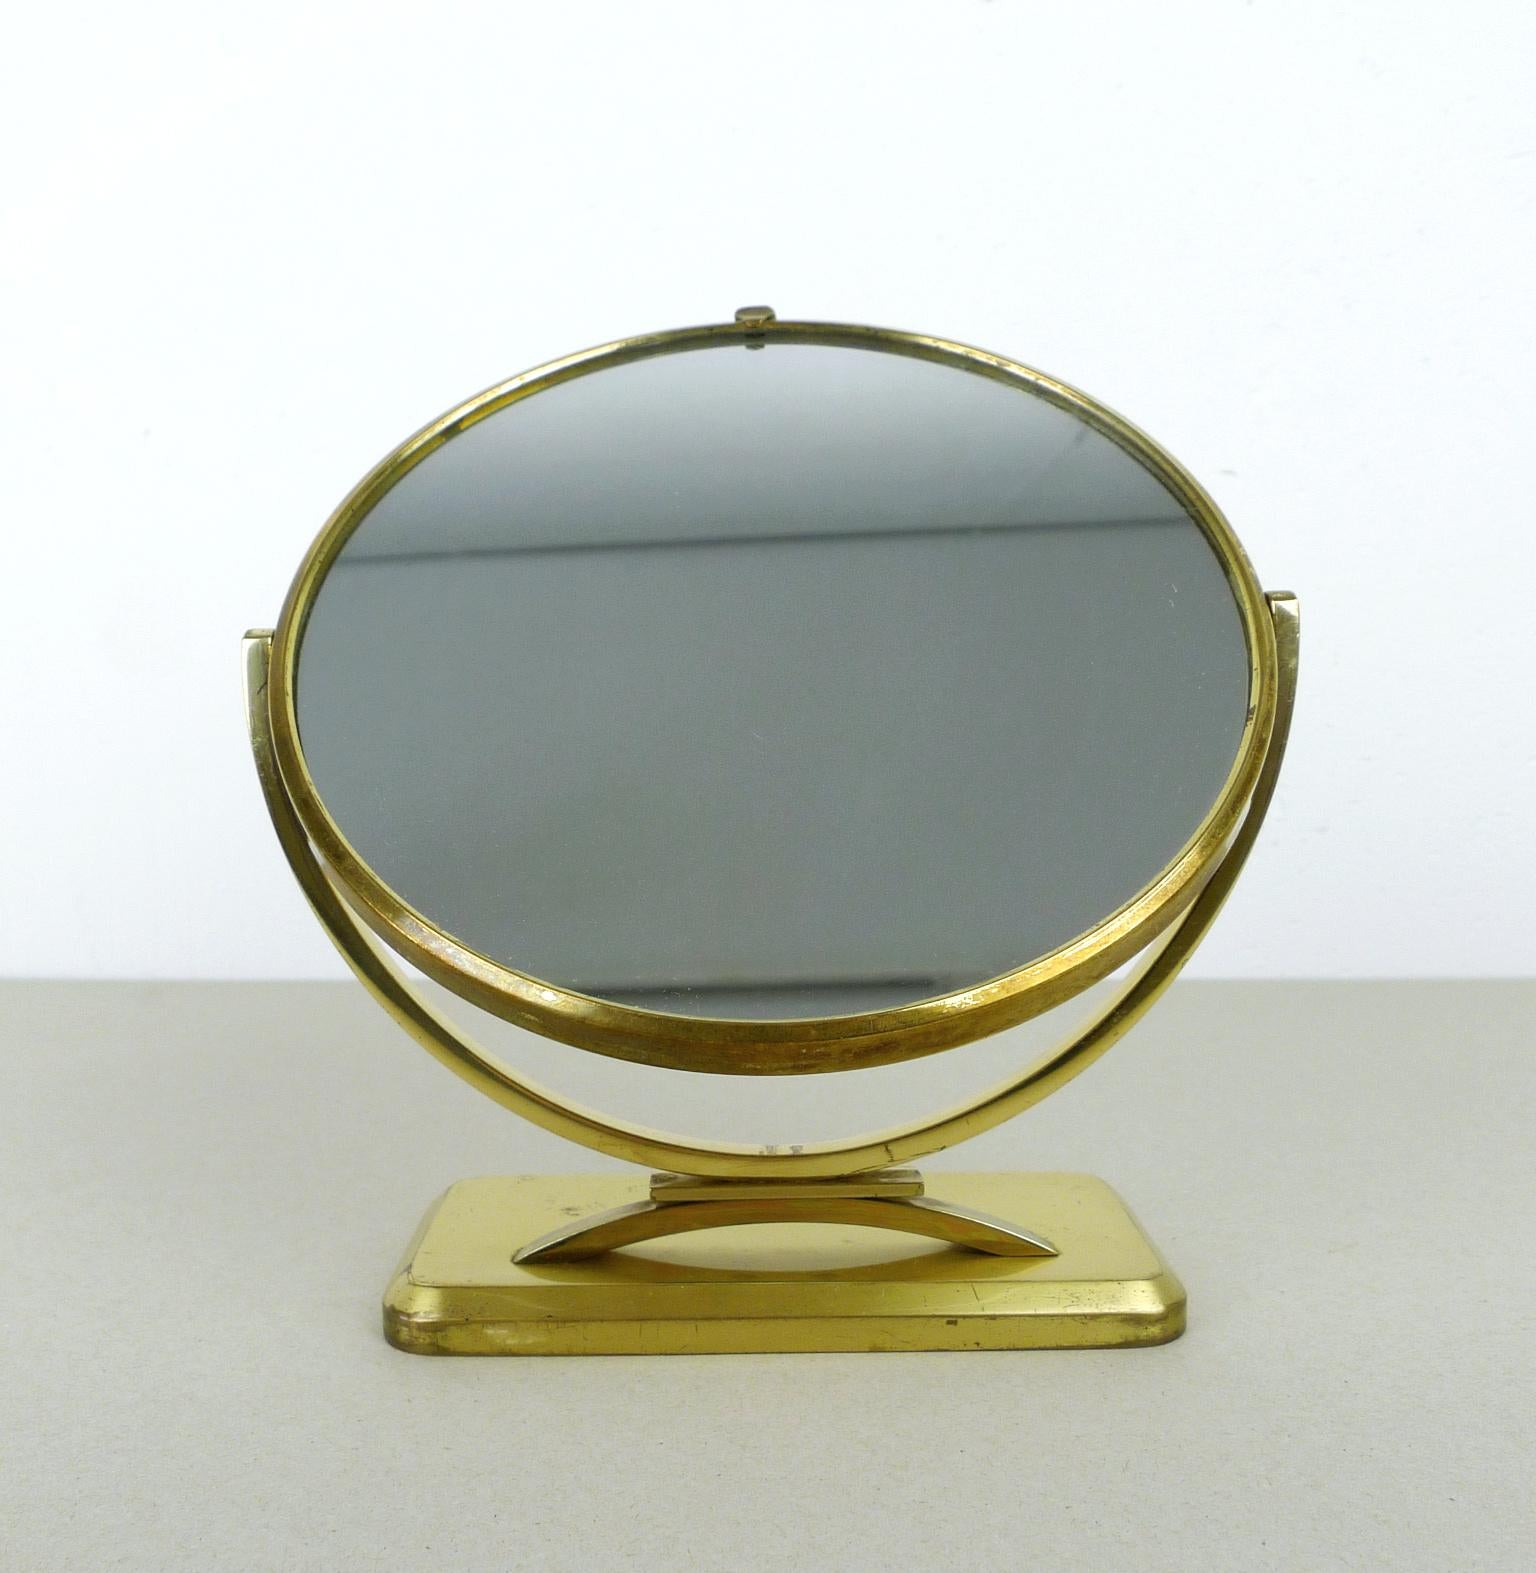 Small round table mirror with brass stand and handle from the 1950s. The mirror can be rotated around a central axis. The back has green polka dot pattern behind a domed glass cover. It is in good original condition.